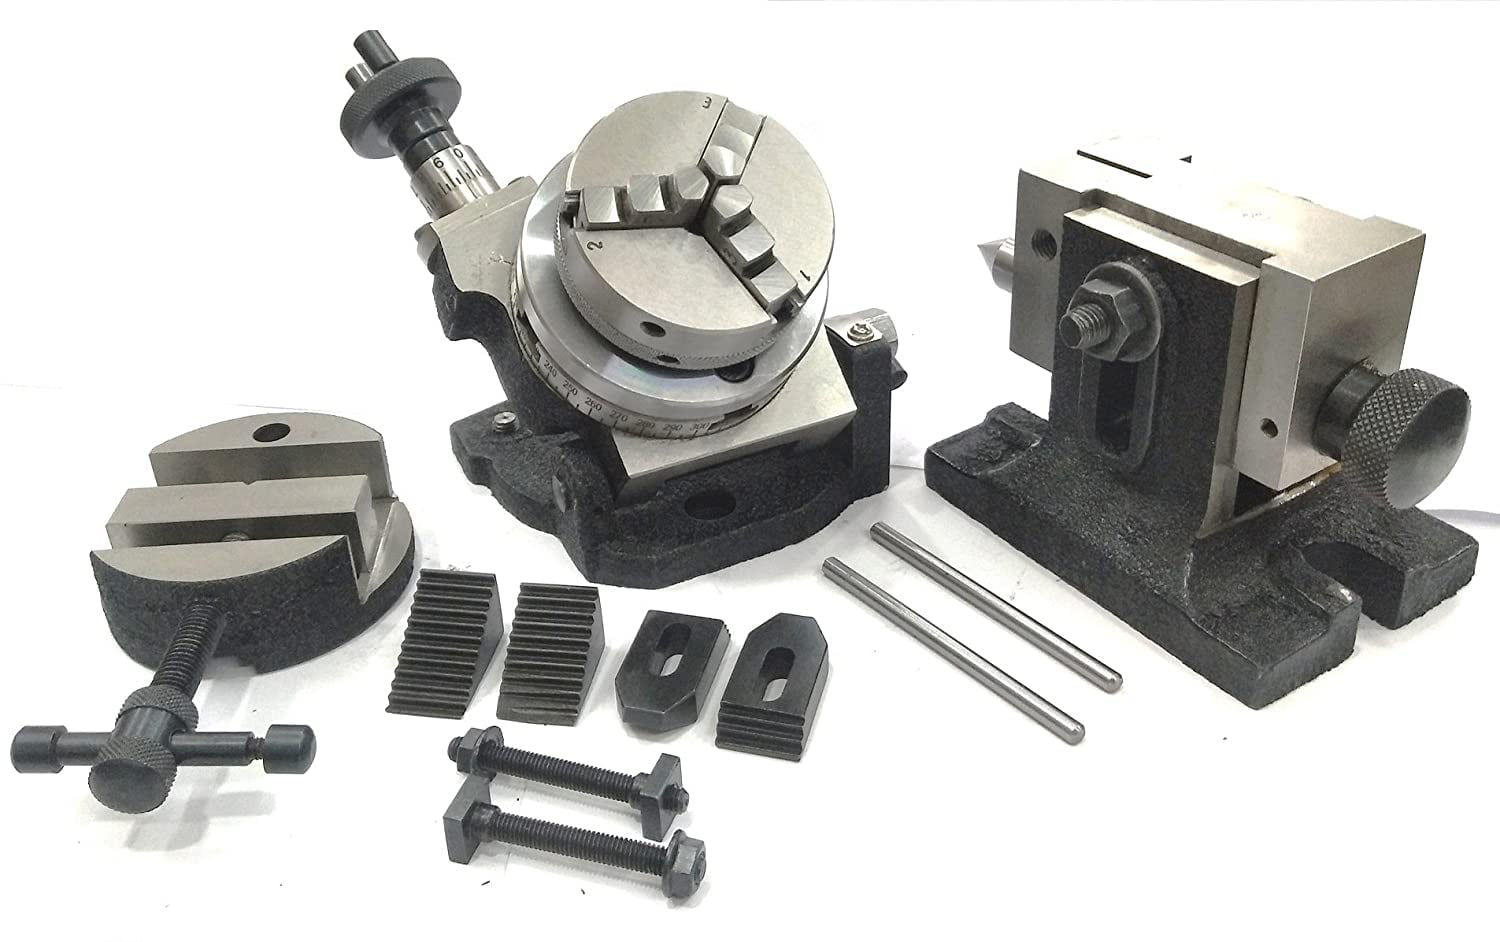 Rotary Table 4" Tilting with 65mm  Chuck Adjustable Tailstock & Clamping Kit 